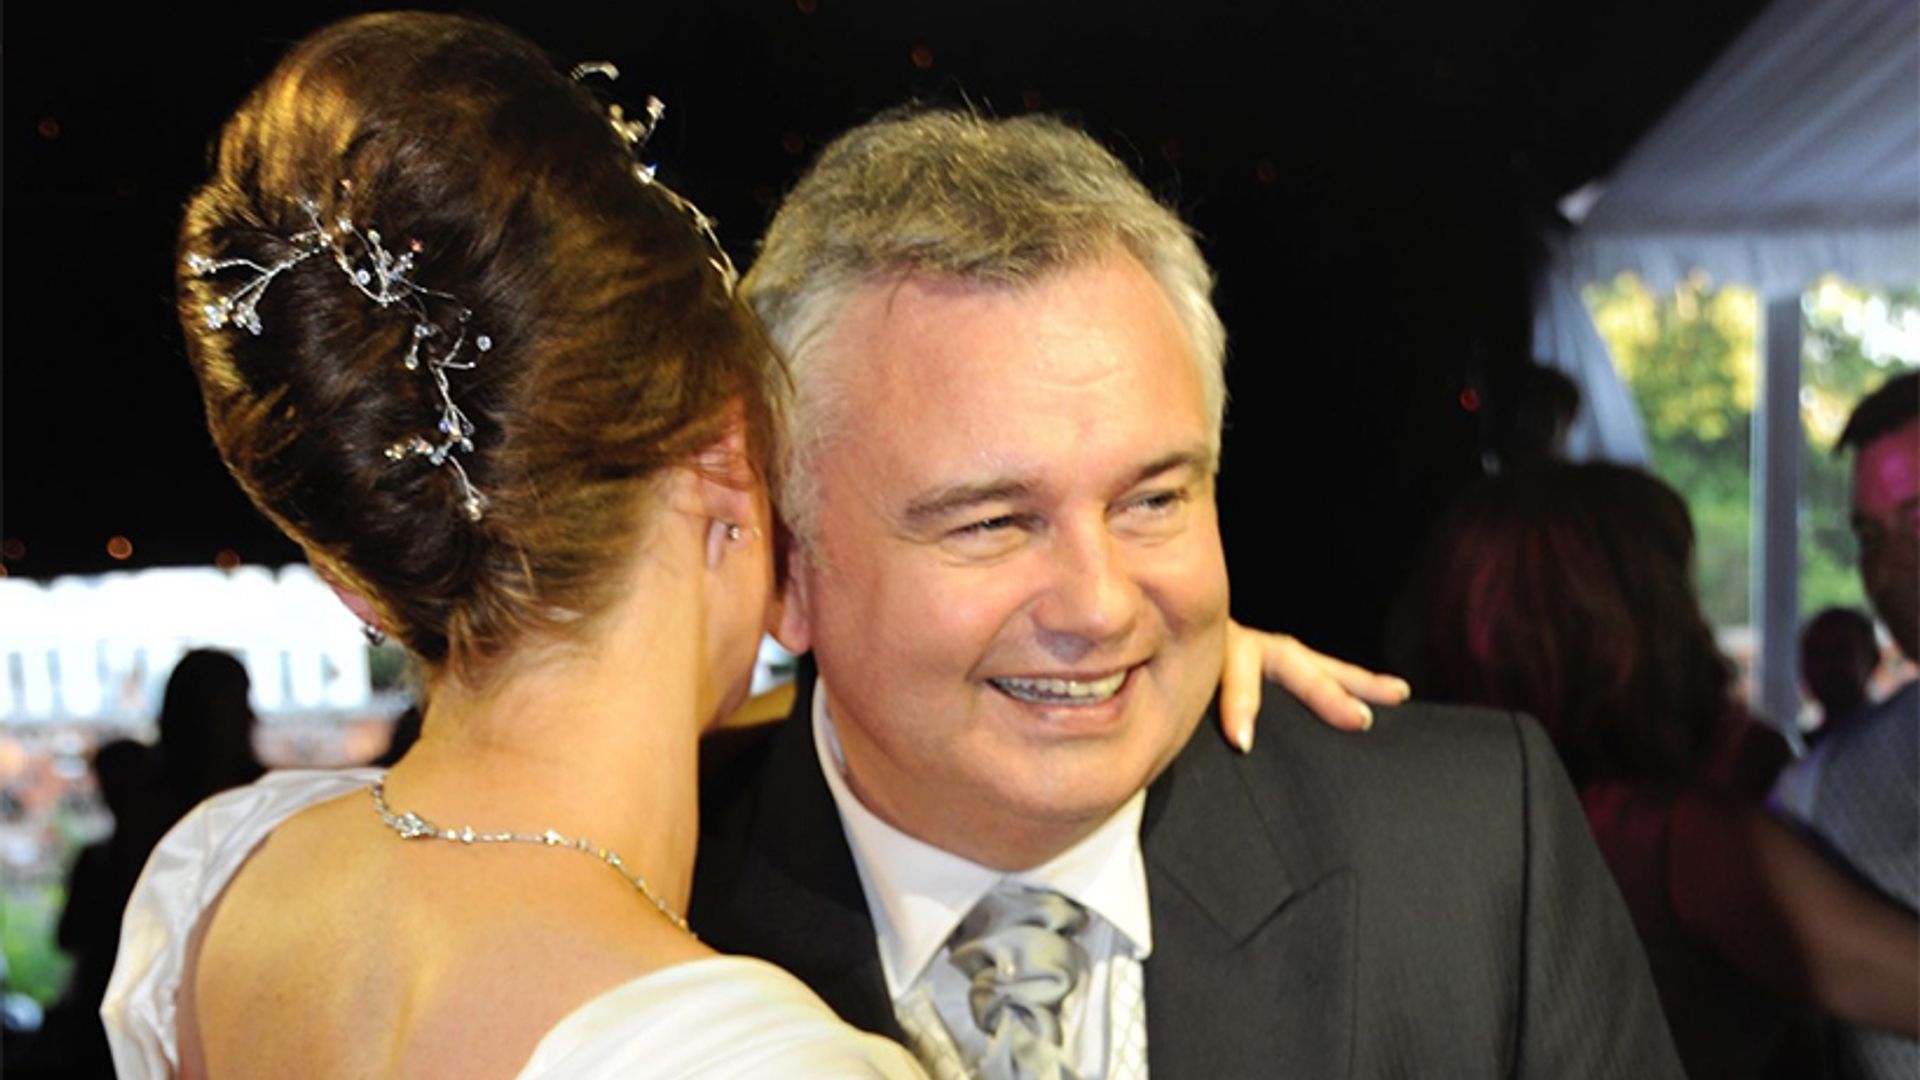 Eamonn Holmes shares hilarious photo of wife Ruth from son Declan's wedding